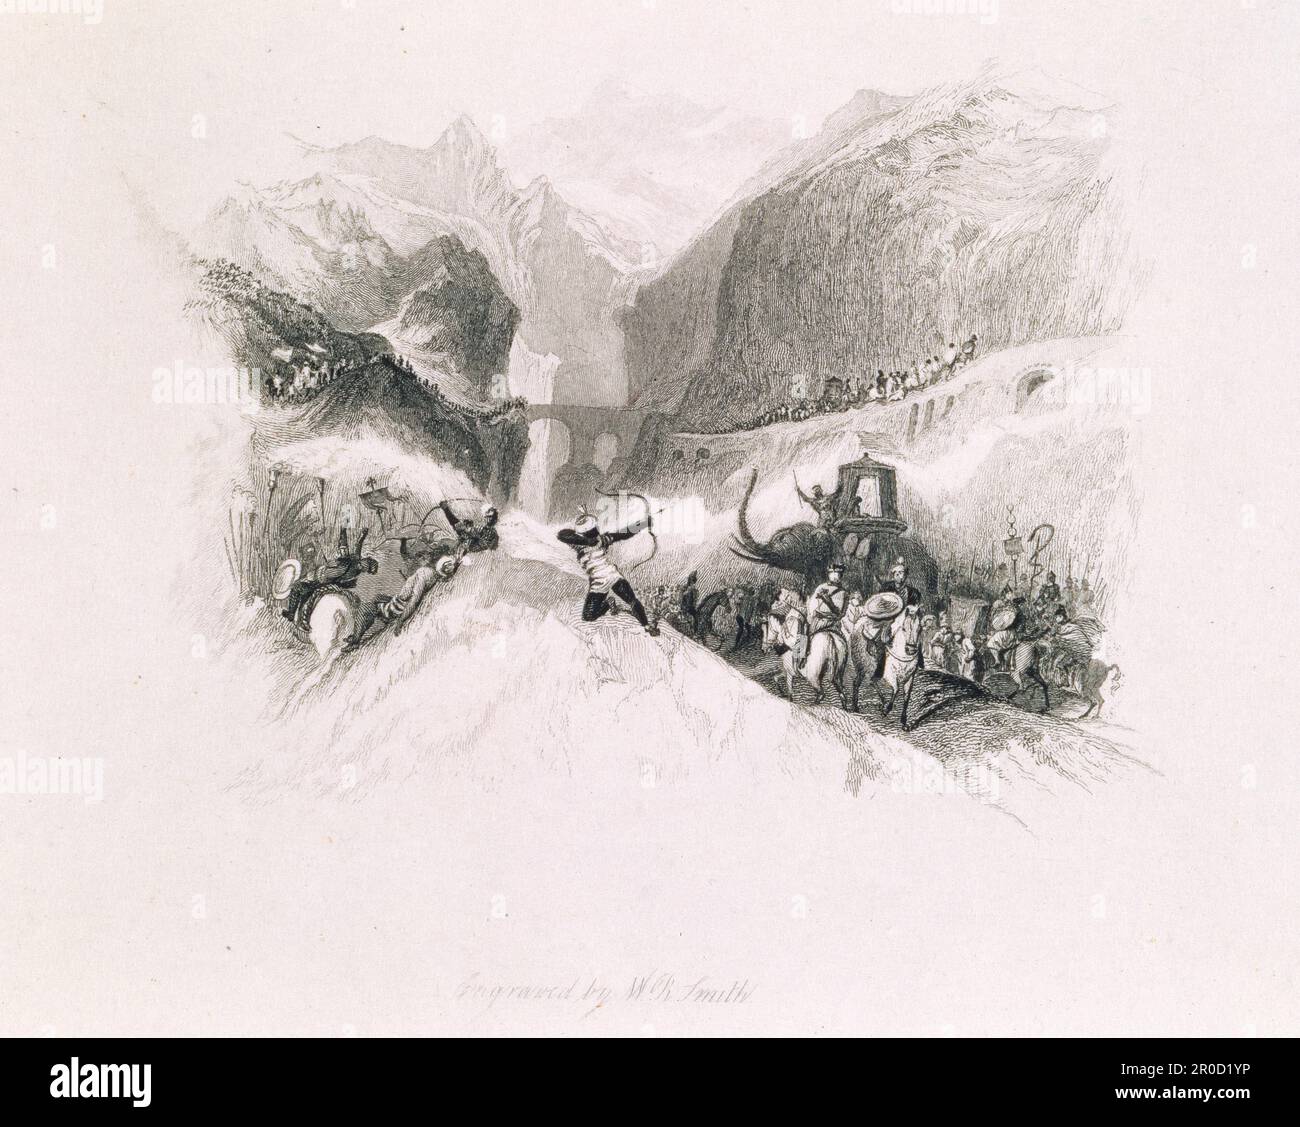 Rogers' Italy - Hannibal Passing The Alps, 1830. Steel engraving. After: J M W Turner. Engraver: W R Smith.  From Rogers' Italy, 1830, page 29. Stock Photo